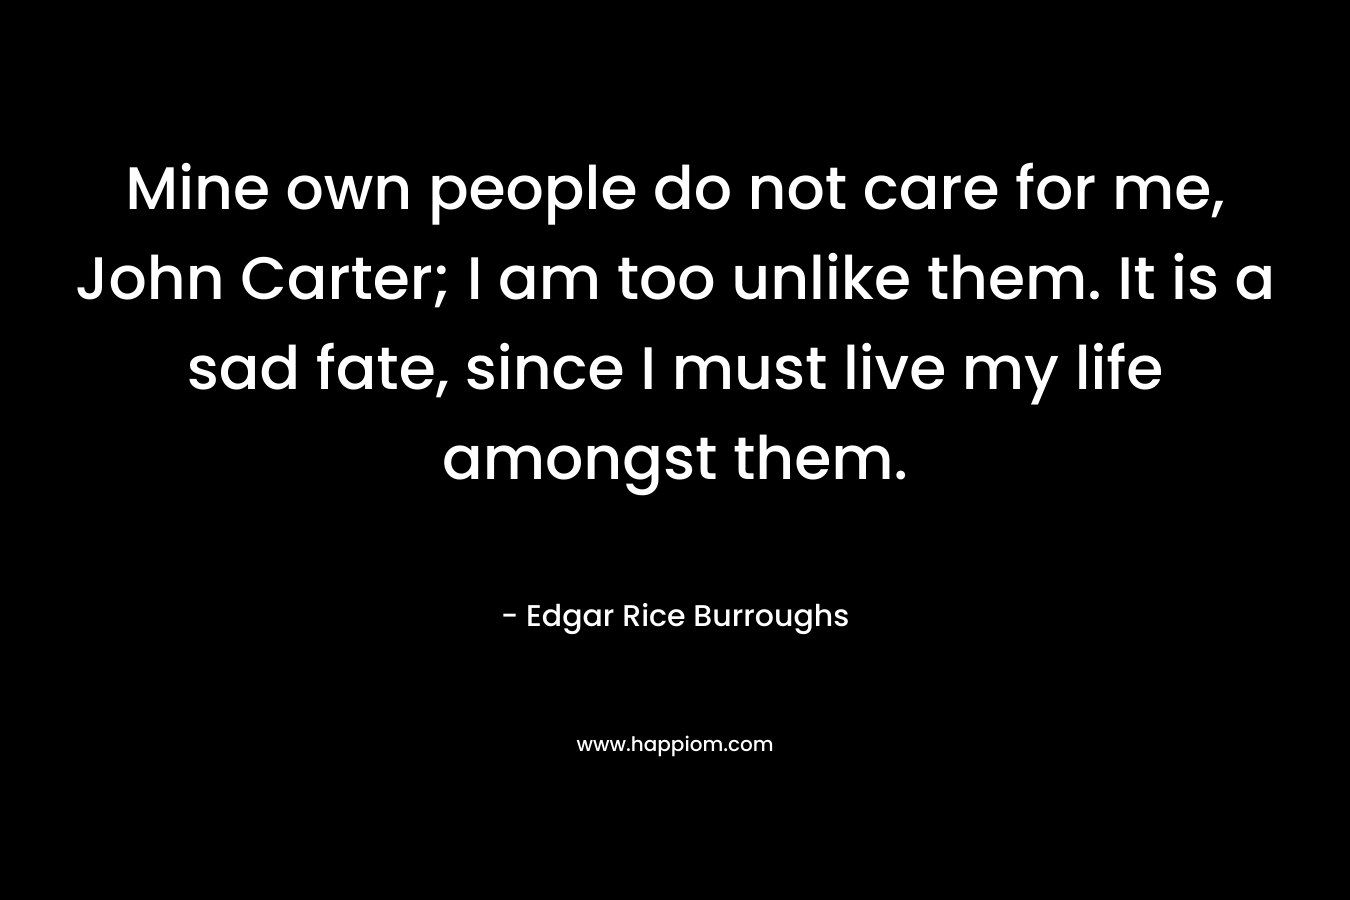 Mine own people do not care for me, John Carter; I am too unlike them. It is a sad fate, since I must live my life amongst them. – Edgar Rice Burroughs